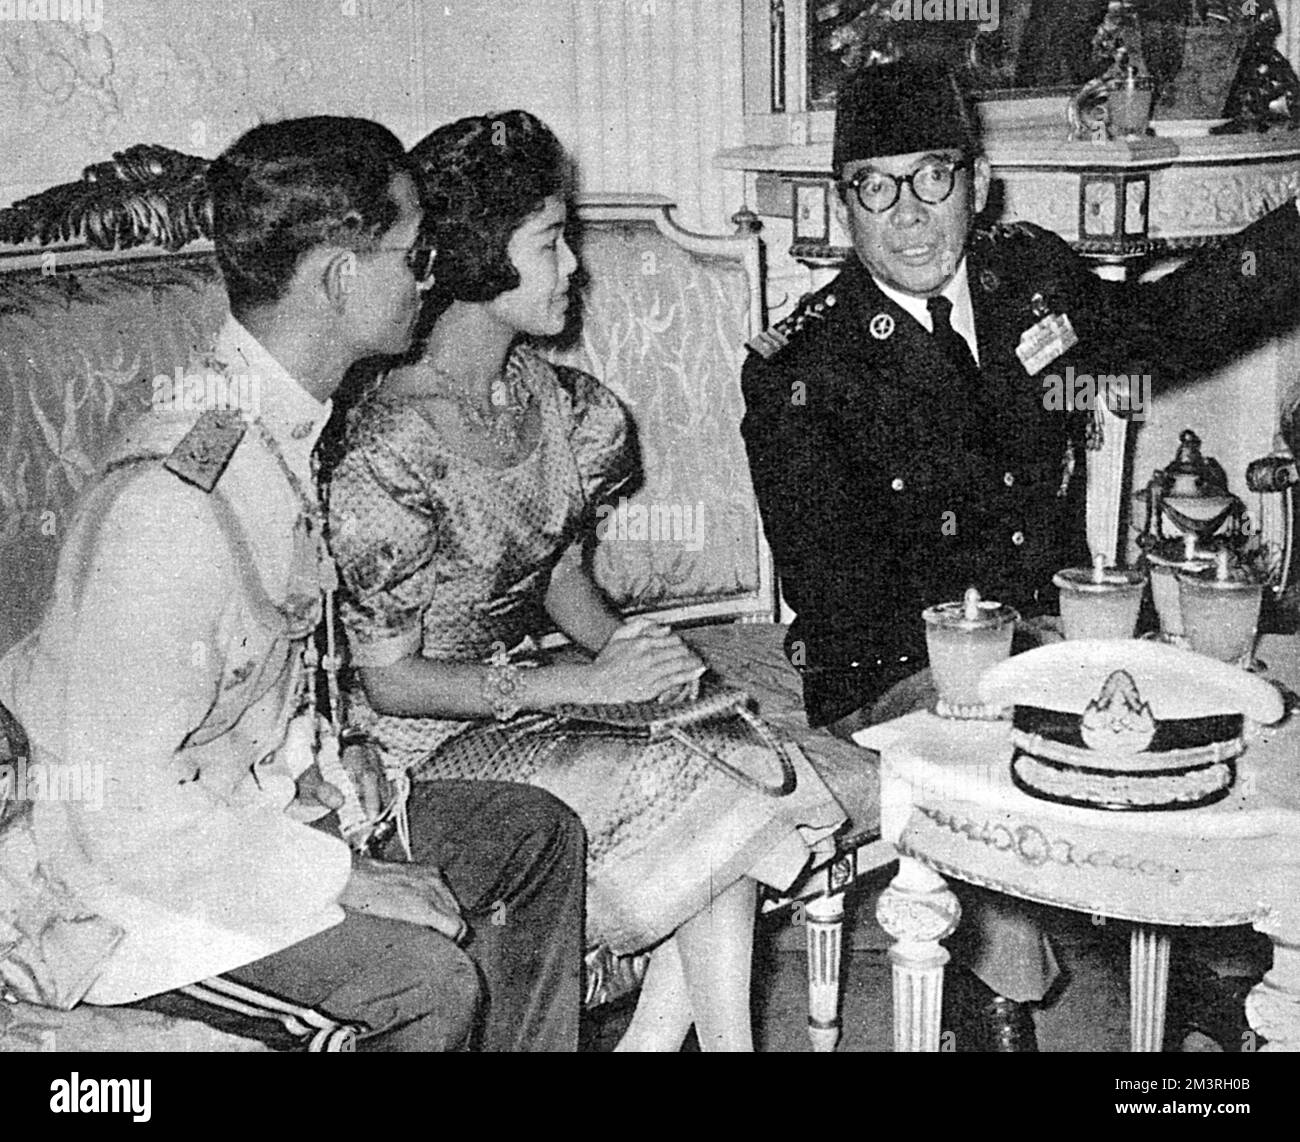 An official state visit to Indonesia by King Bhumibol Adulyadej (Rama IX) (1927-) and Queen Sirikit (1932-) of Thailand - the couple talk to Sukarno (1901-1970), the first President of Indonesia, serving in office from 1945 to 1967     Date: 1959 Stock Photo